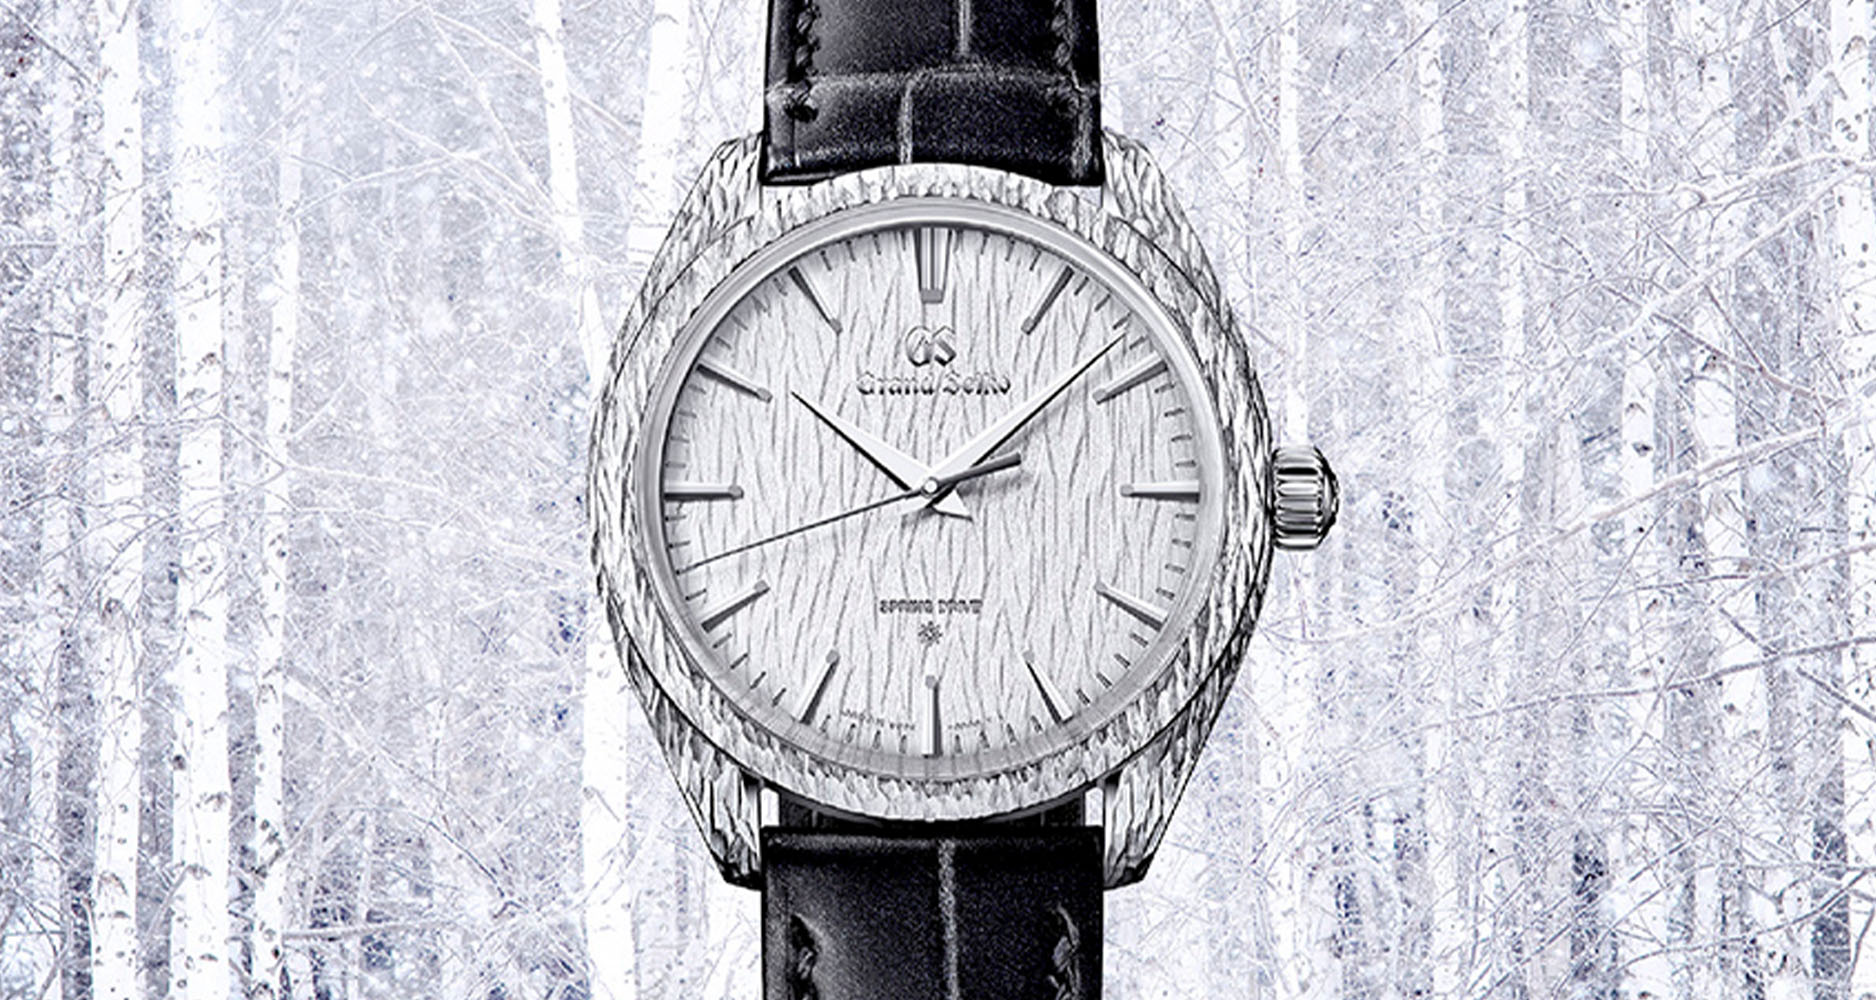 The white birch forest that inspired the Grand Seiko Masterpiece Limited Edition SBGZ009 can be seen in the back of this image.